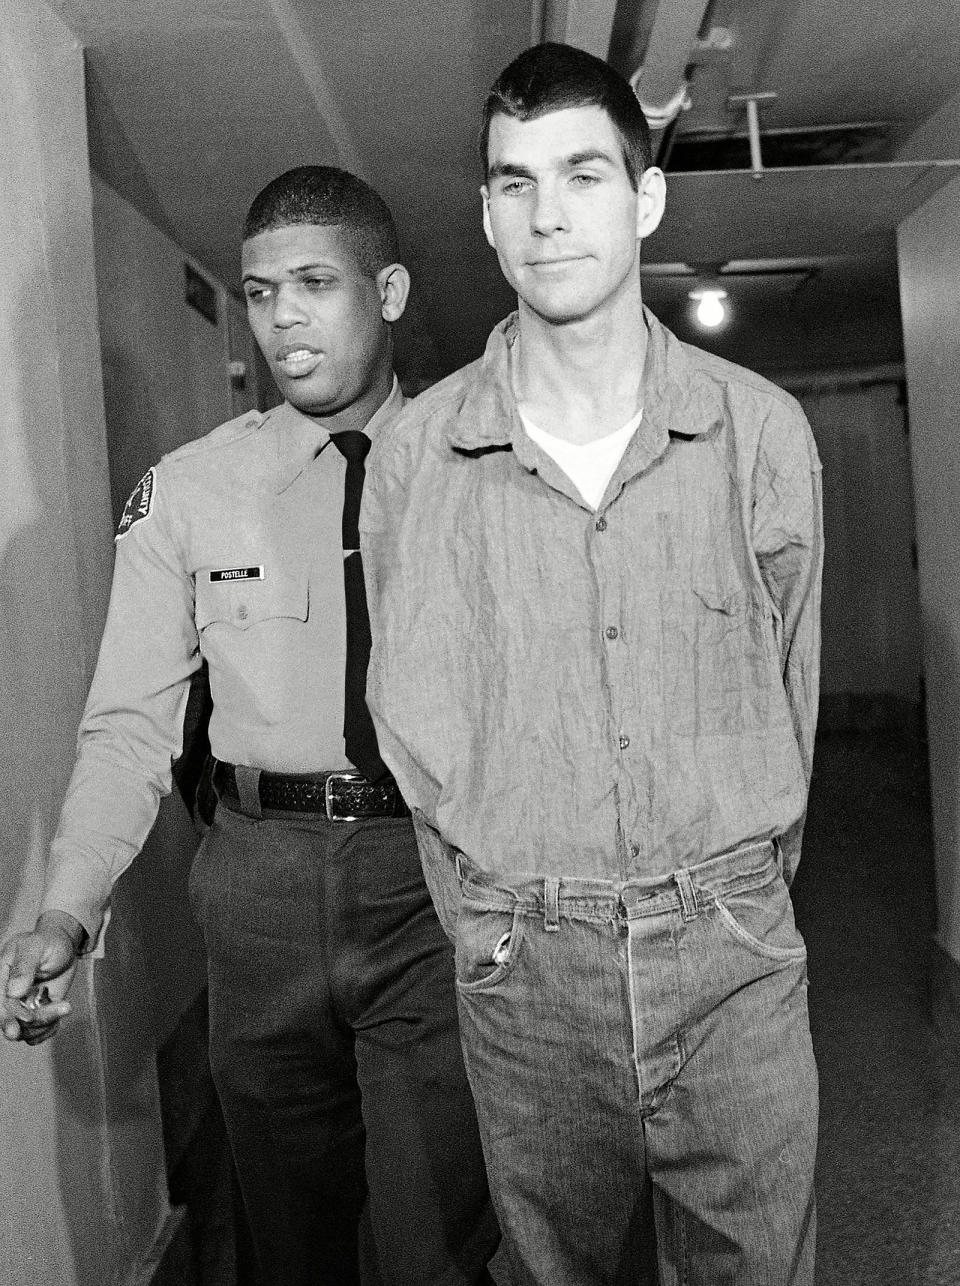 <p>Watson (right), named in court testimony as a killer in the Tate-LaBianca murders, arrives in court for arraignment in L.A. in 1971. Watson, a member of the "Manson family," was ruled insane and unable to stand trial. Doctors later said he had recovered.</p>